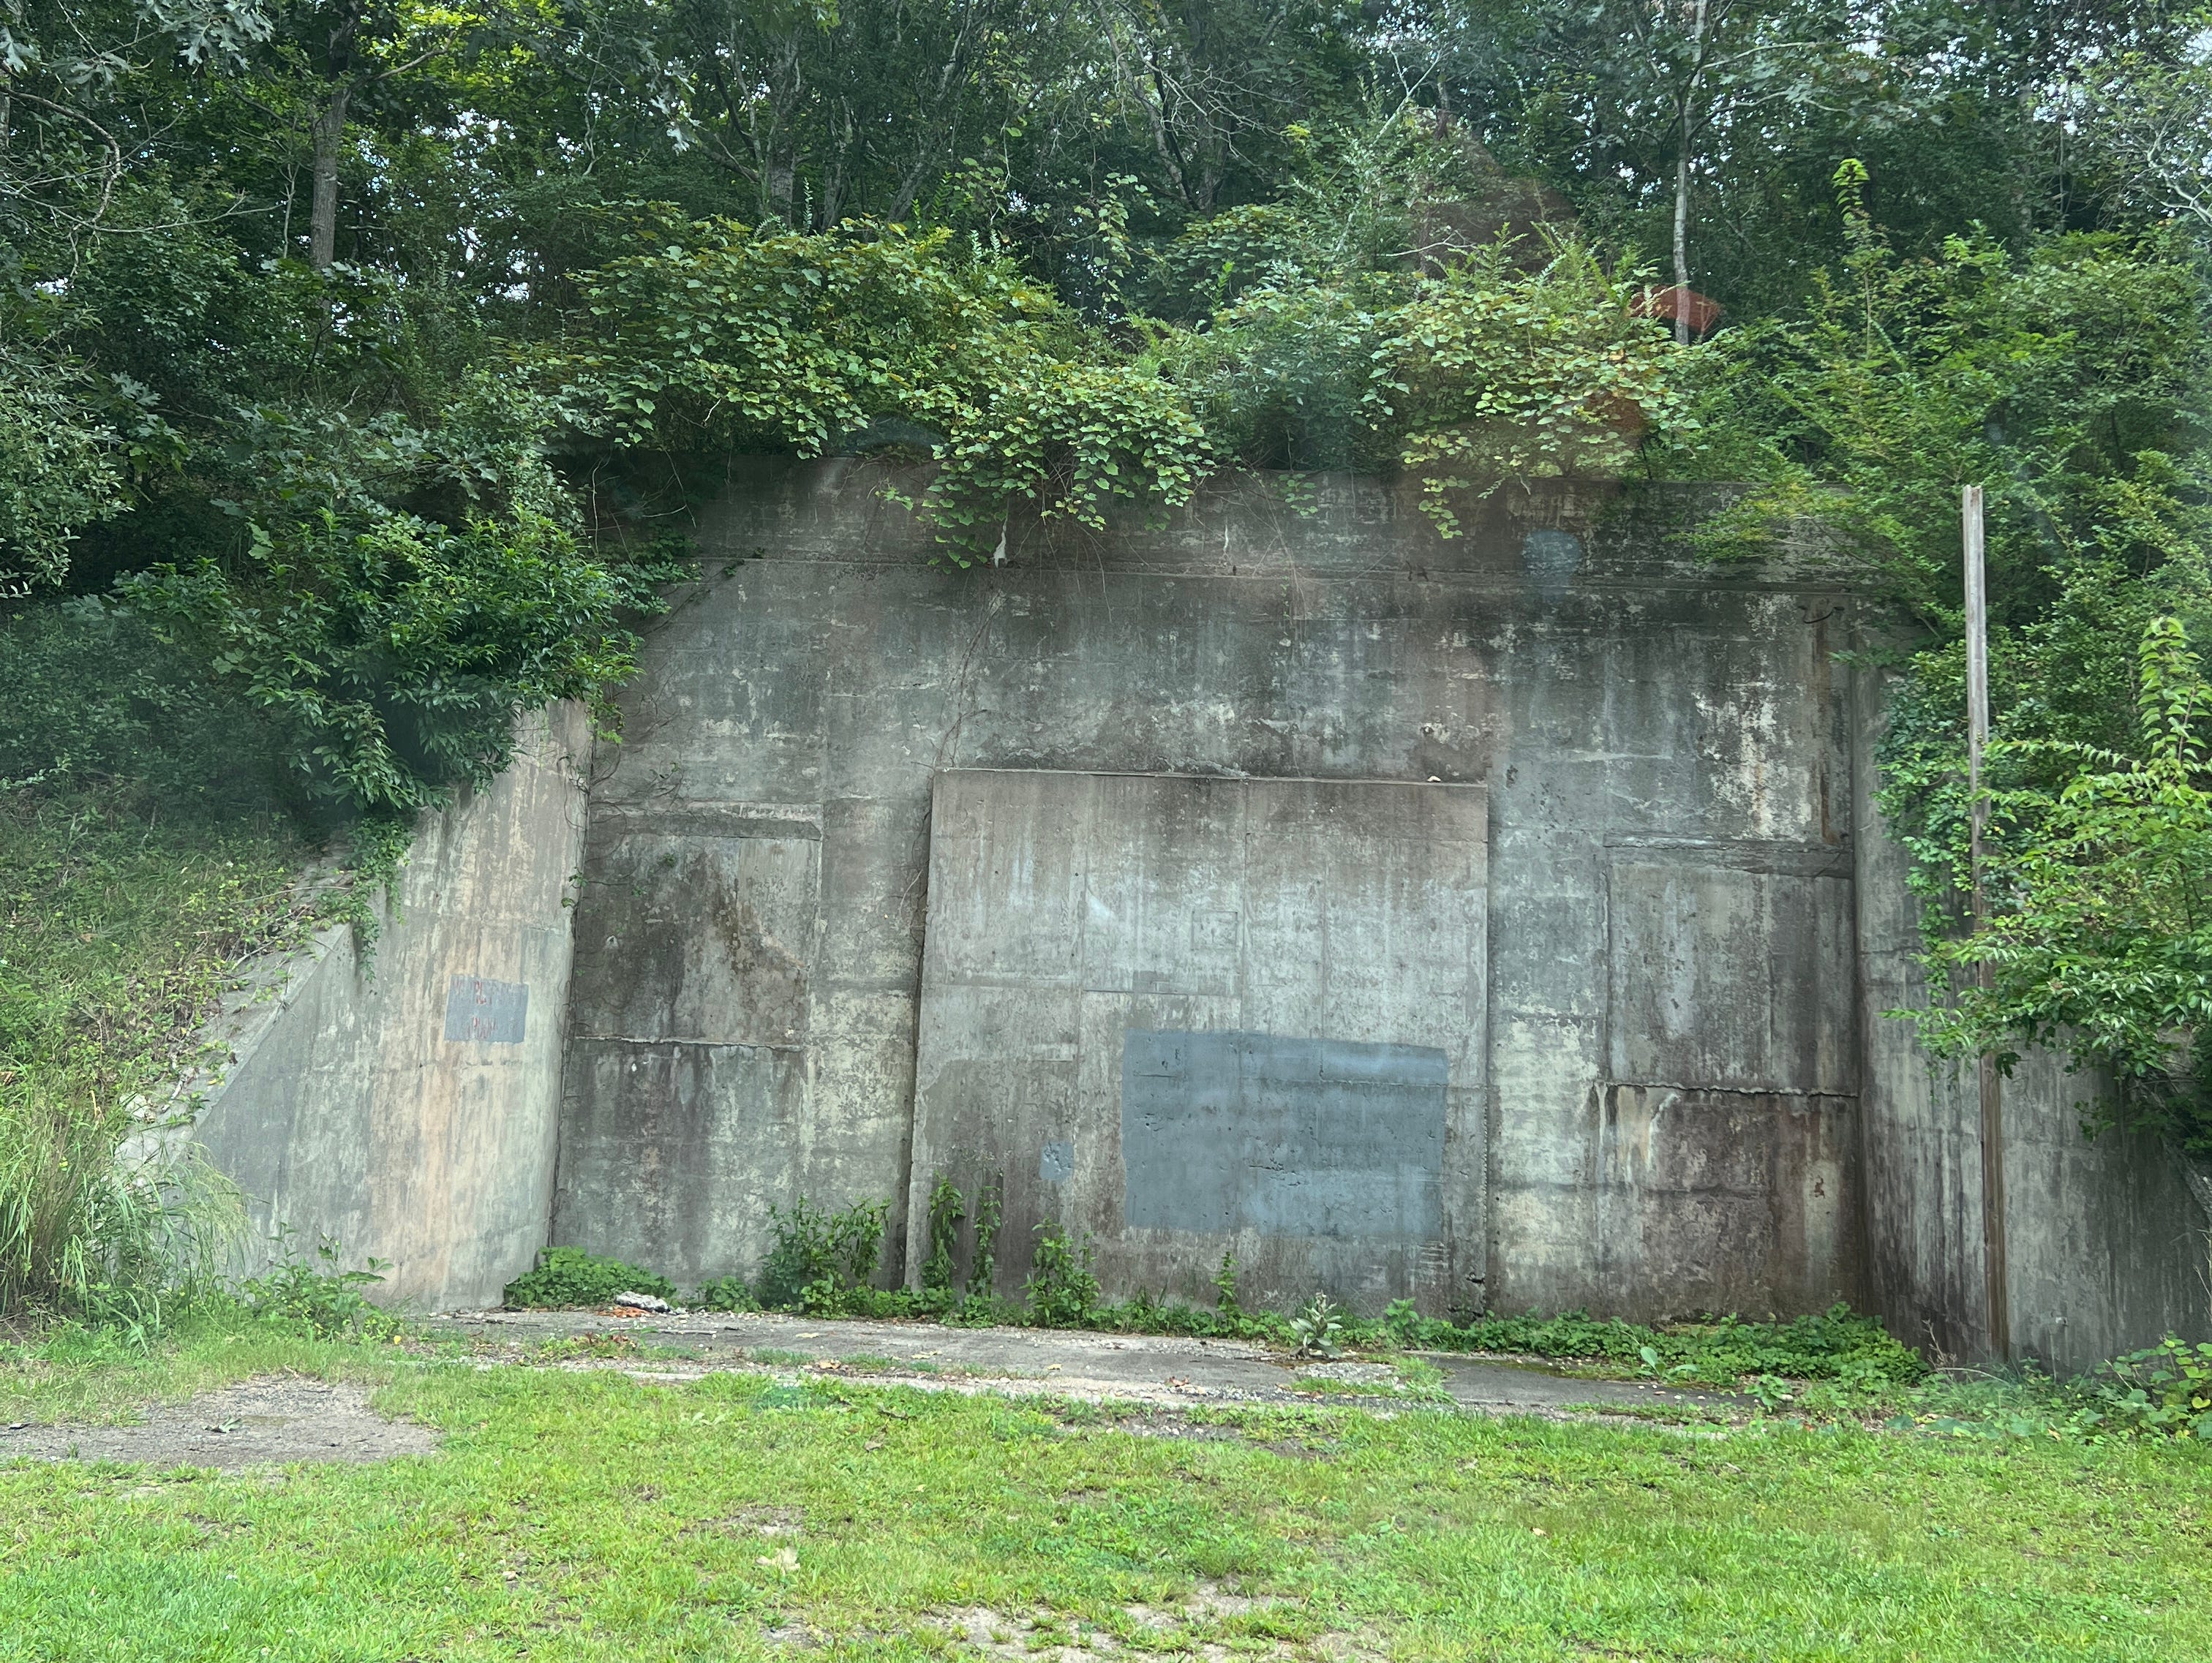 <p>According to signs in the park, the Army built batteries throughout the base. Batteries 112 and 113, which are both still standing, contained two 16-inch guns each. The artillery was removed in 1947.</p>